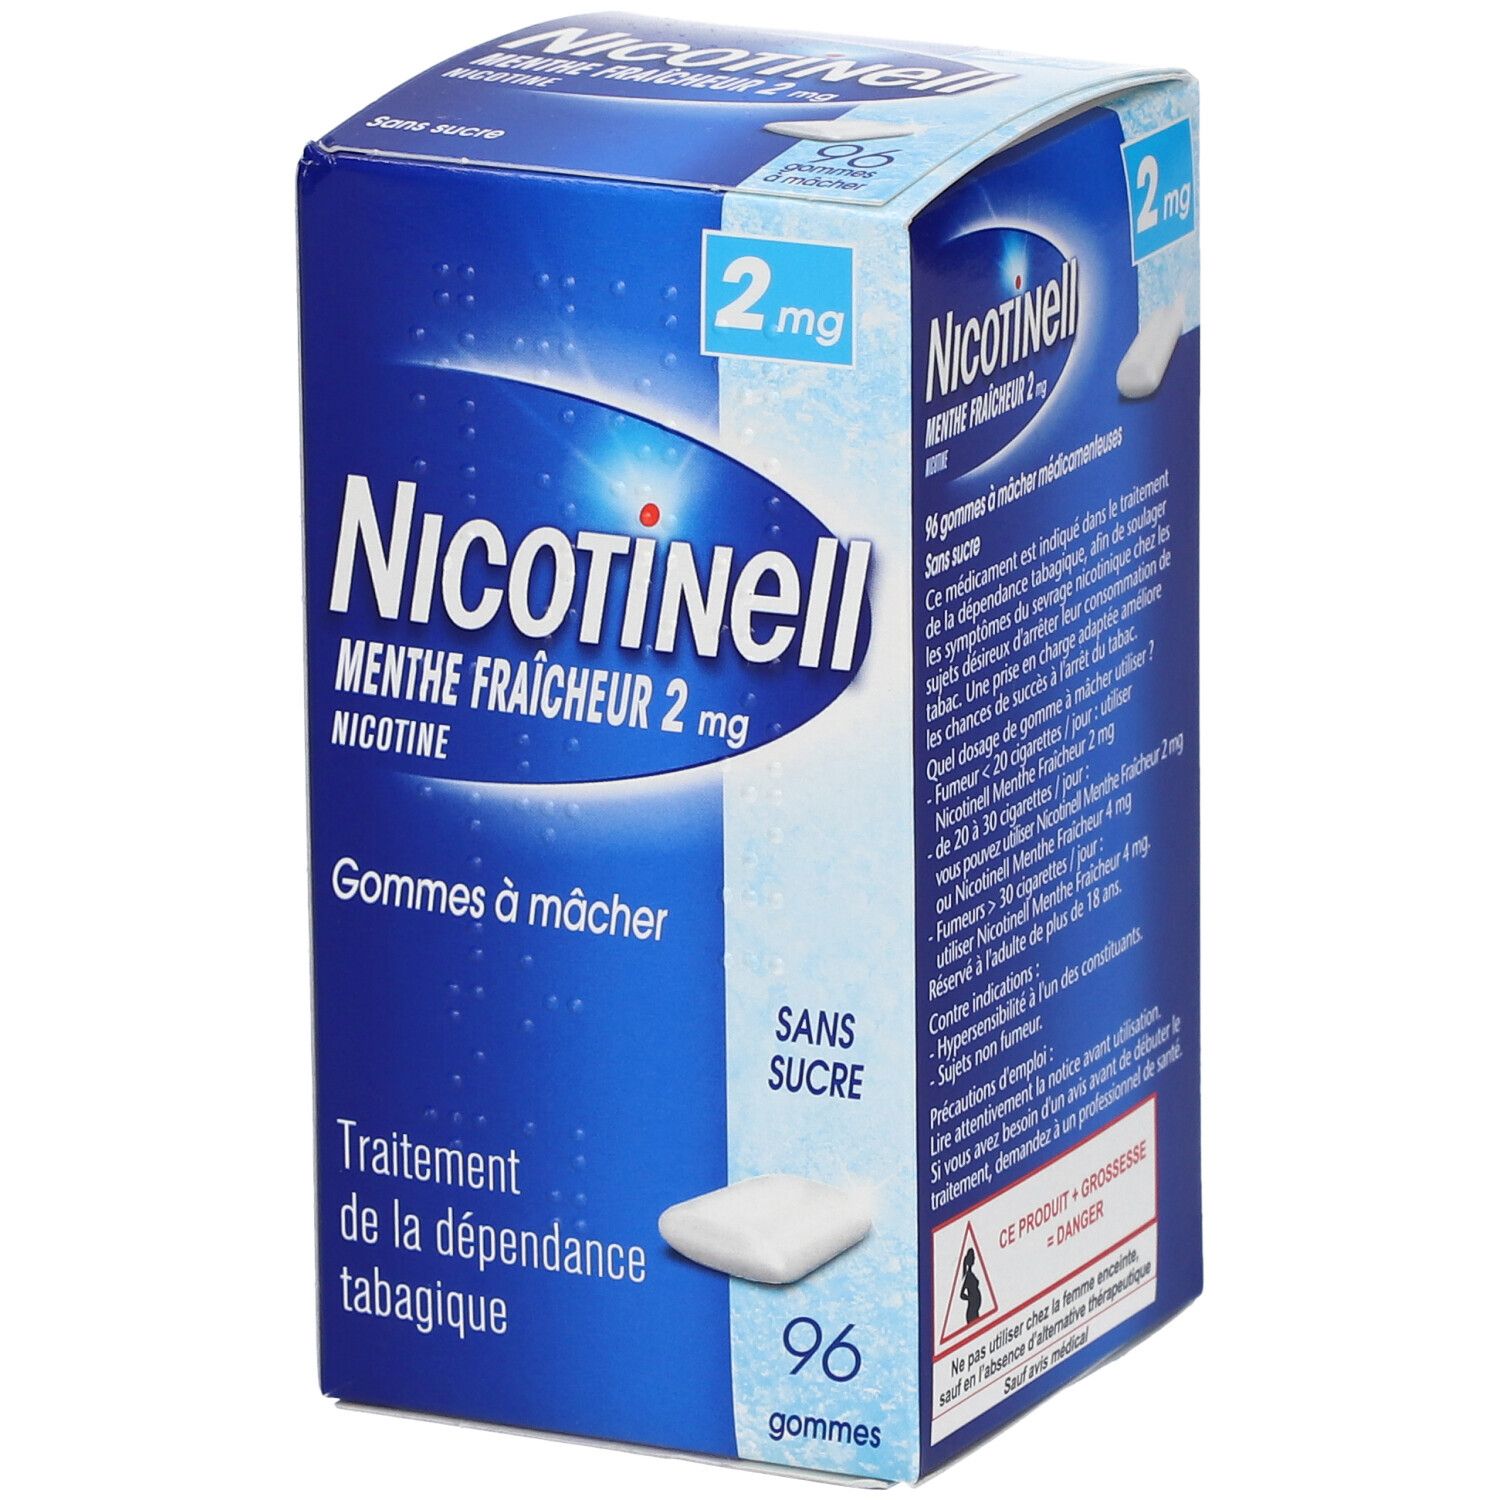 Nicotinell® Menthe fraicheur 2 mg